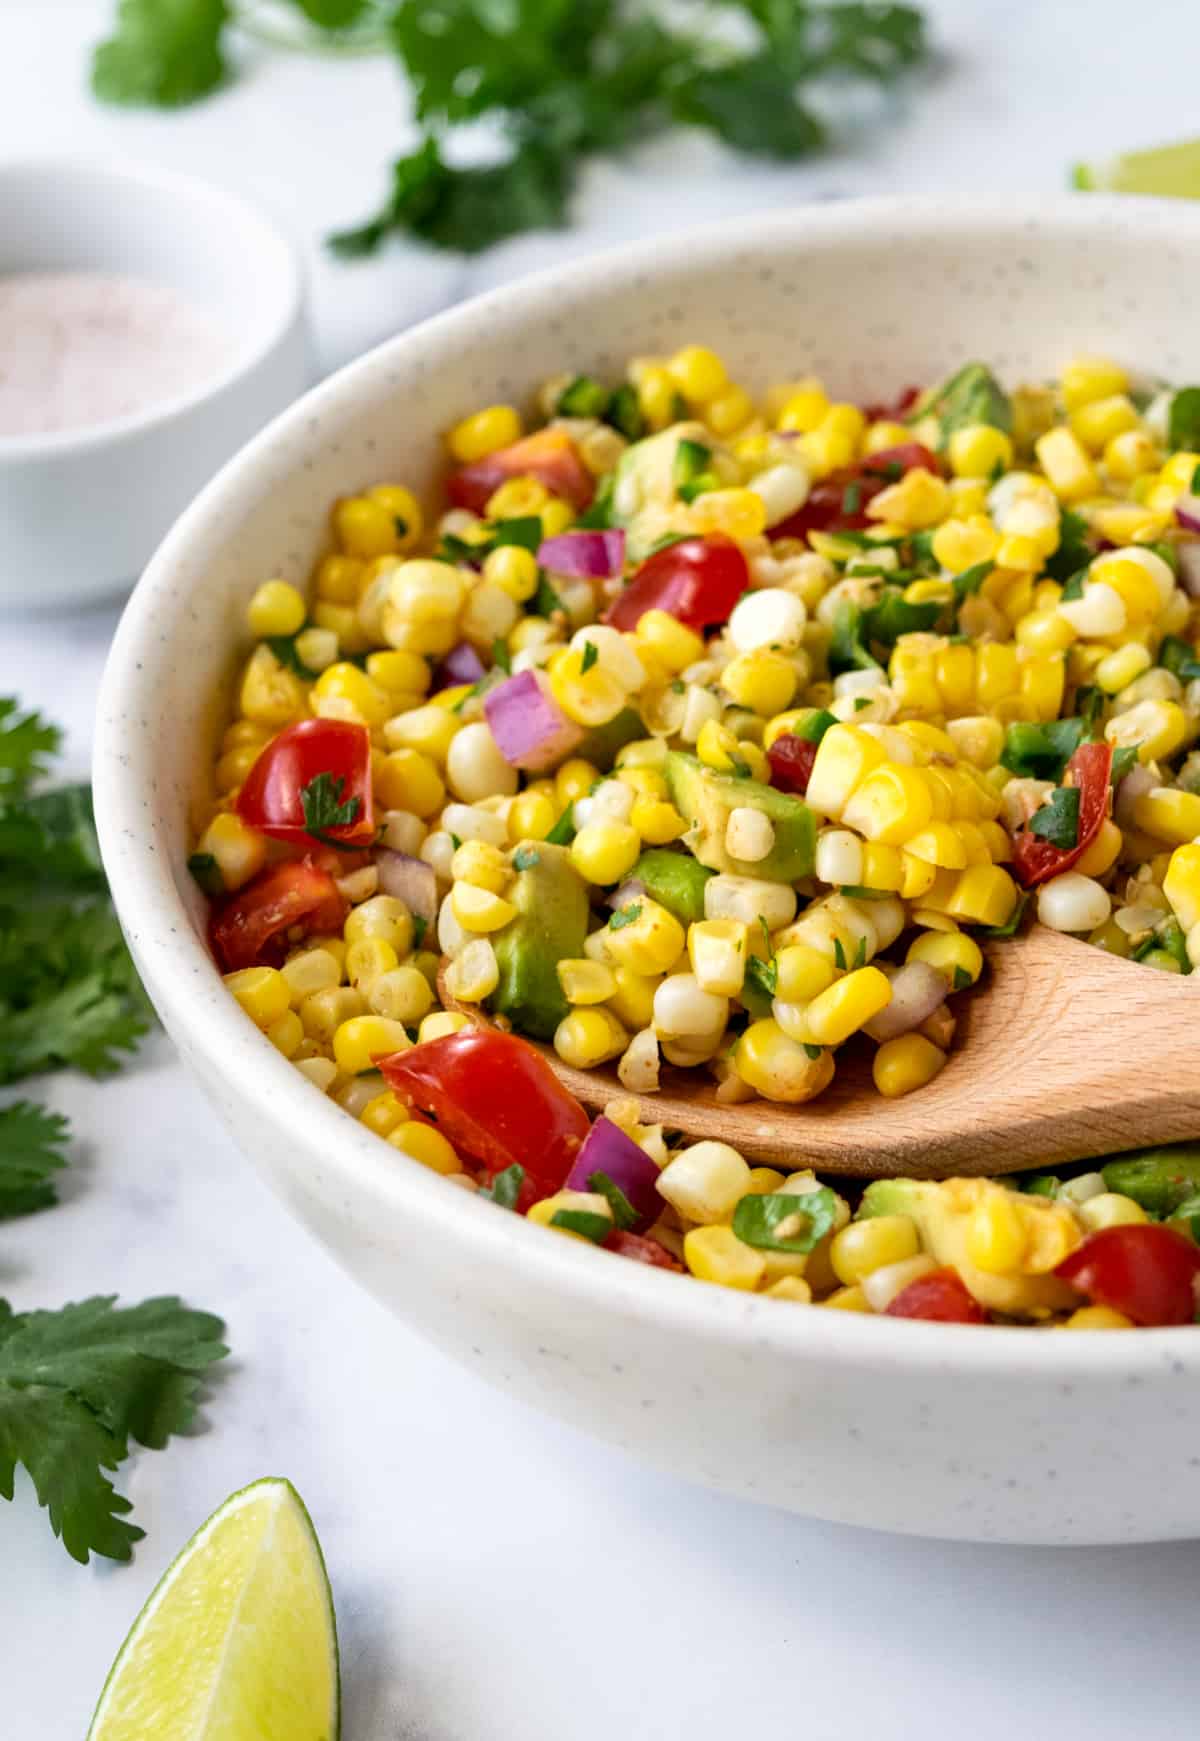 Fiesta Corn Salad with Avocado in a bowl with a serving spoon.